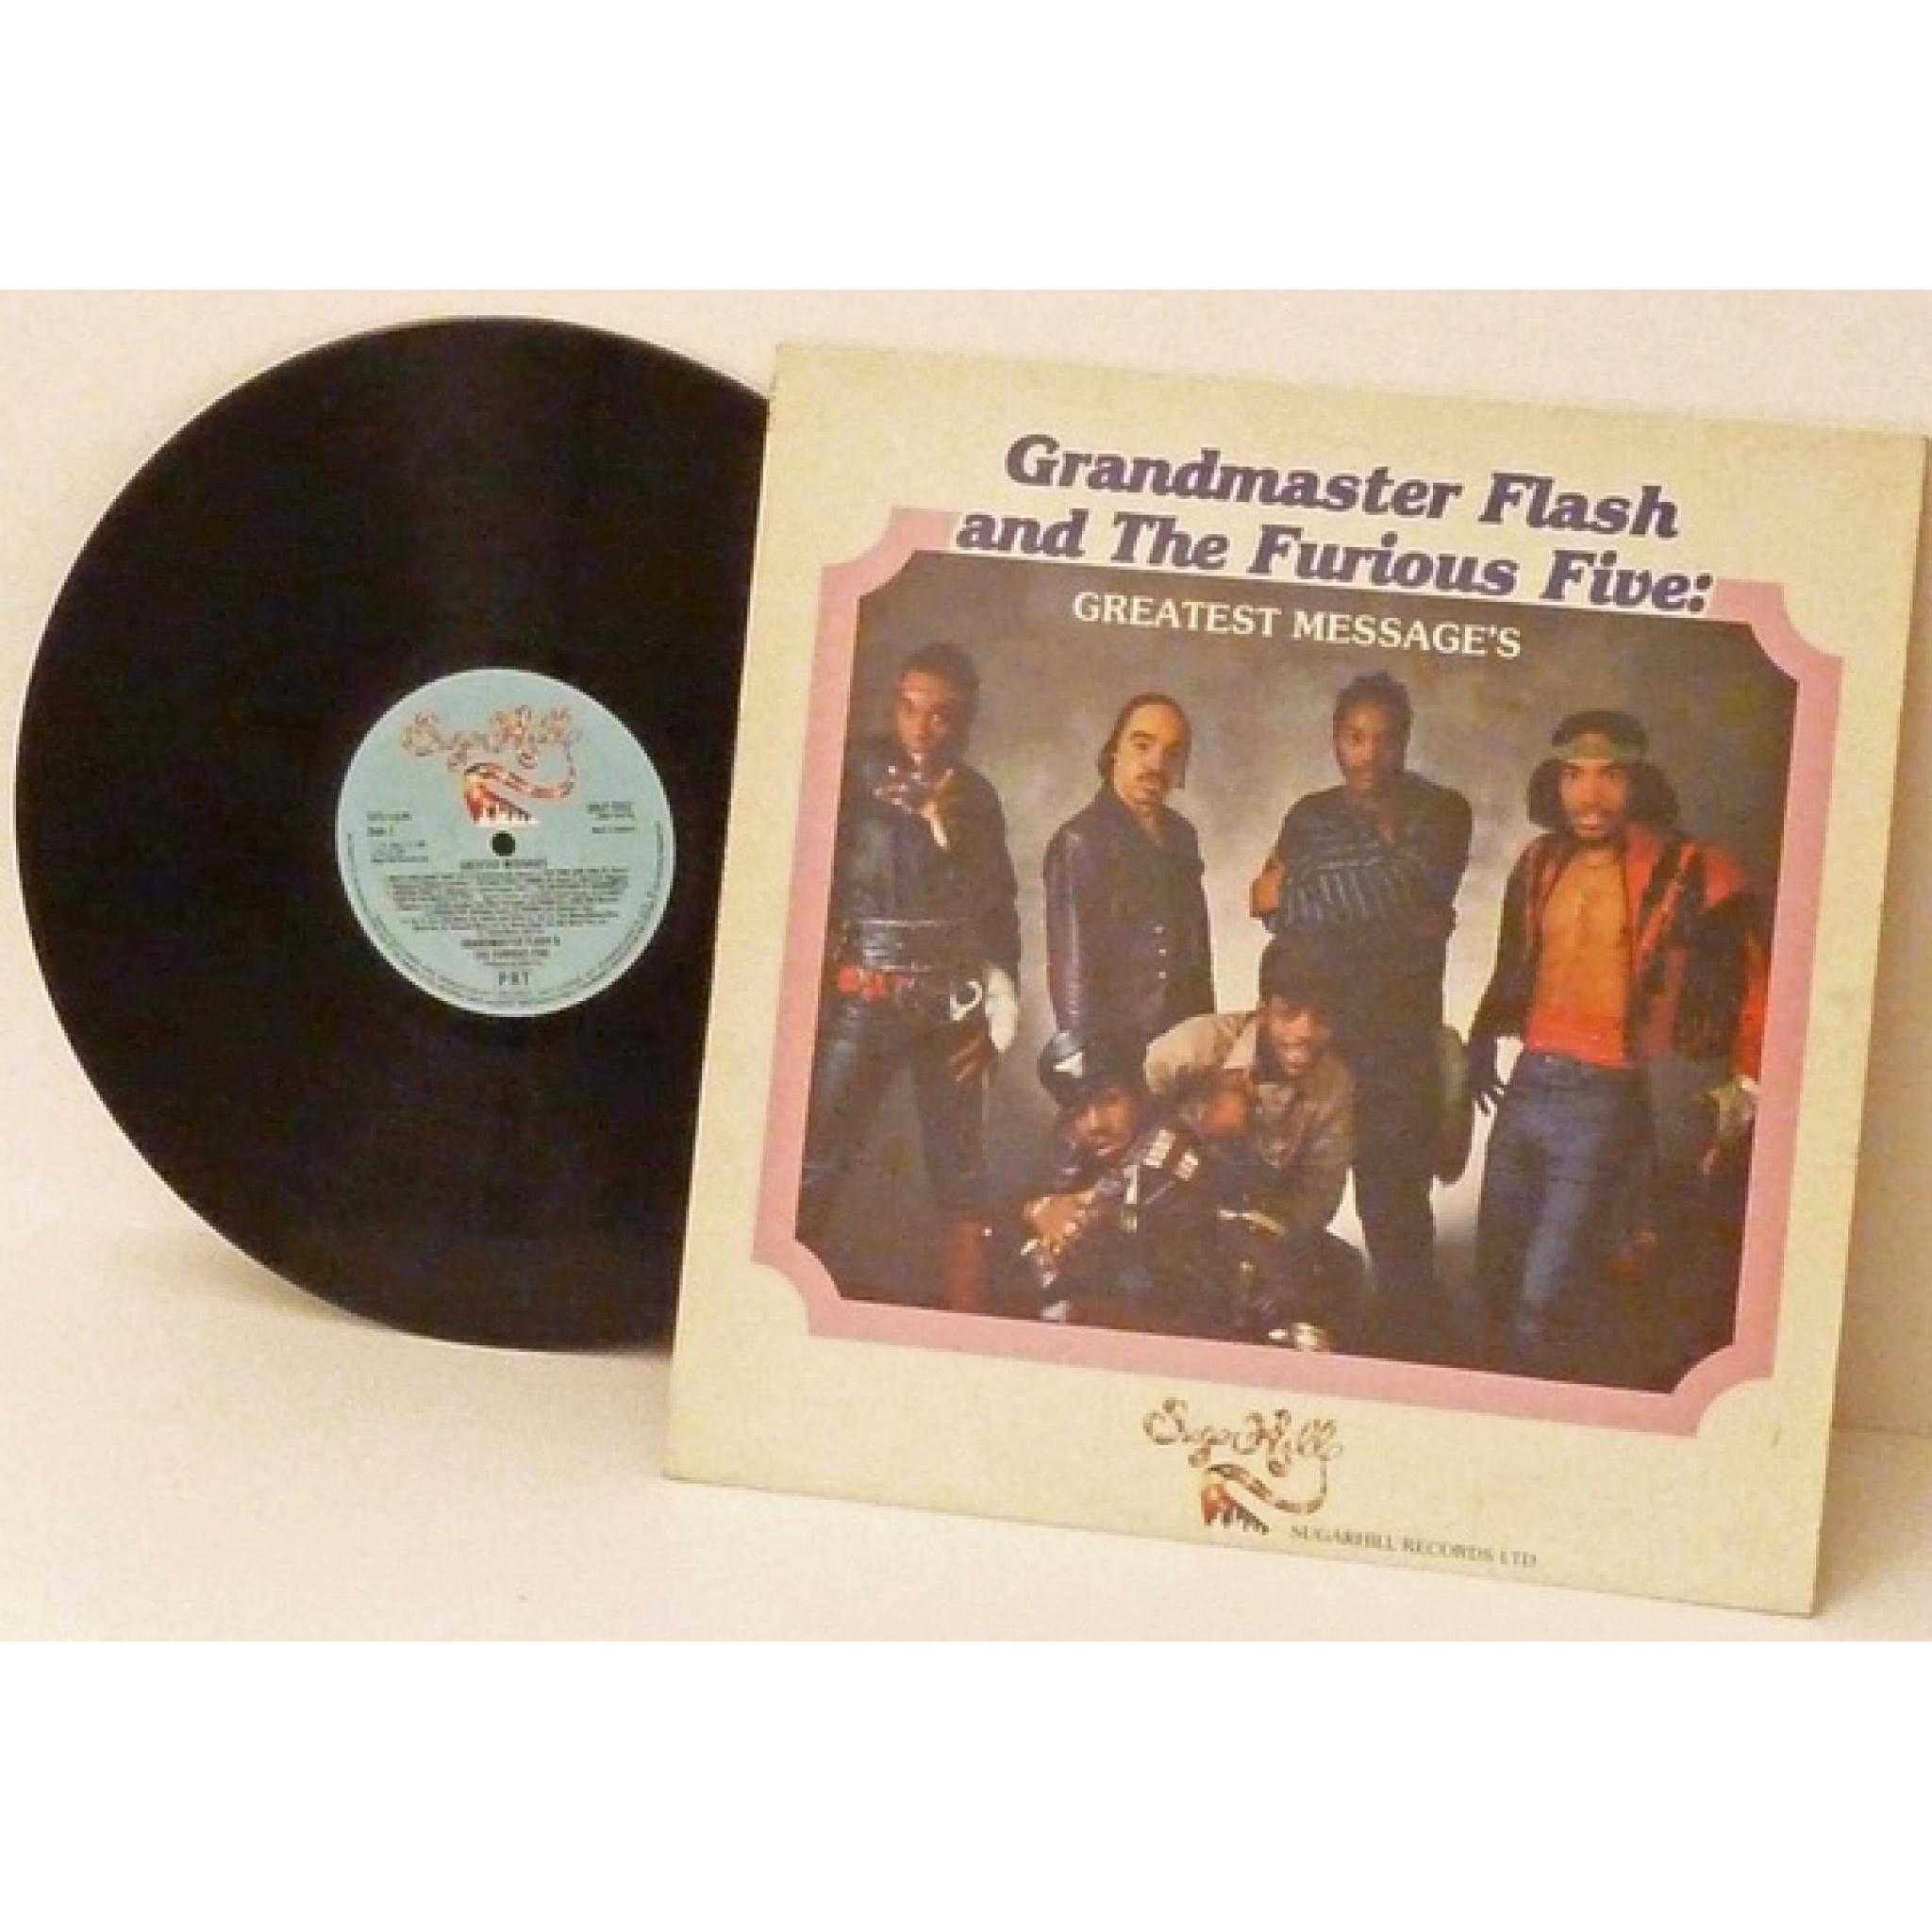 grandmaster flash and the furious five the message album